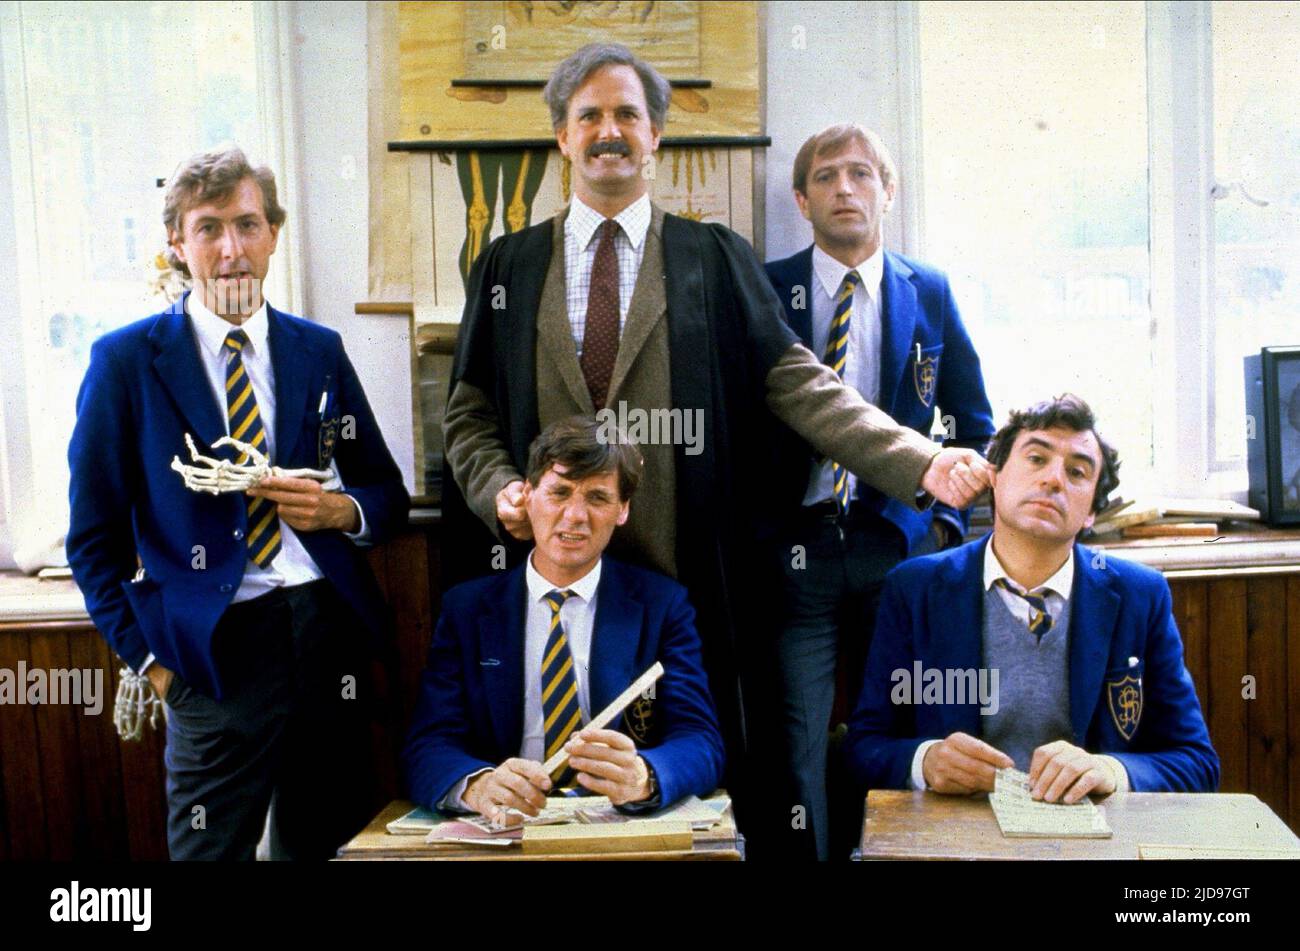 IDLE,PALIN,CLEESE,JONES, MONTY PYTHON'S THE MEANING OF LIFE, 1983, Stock Photo